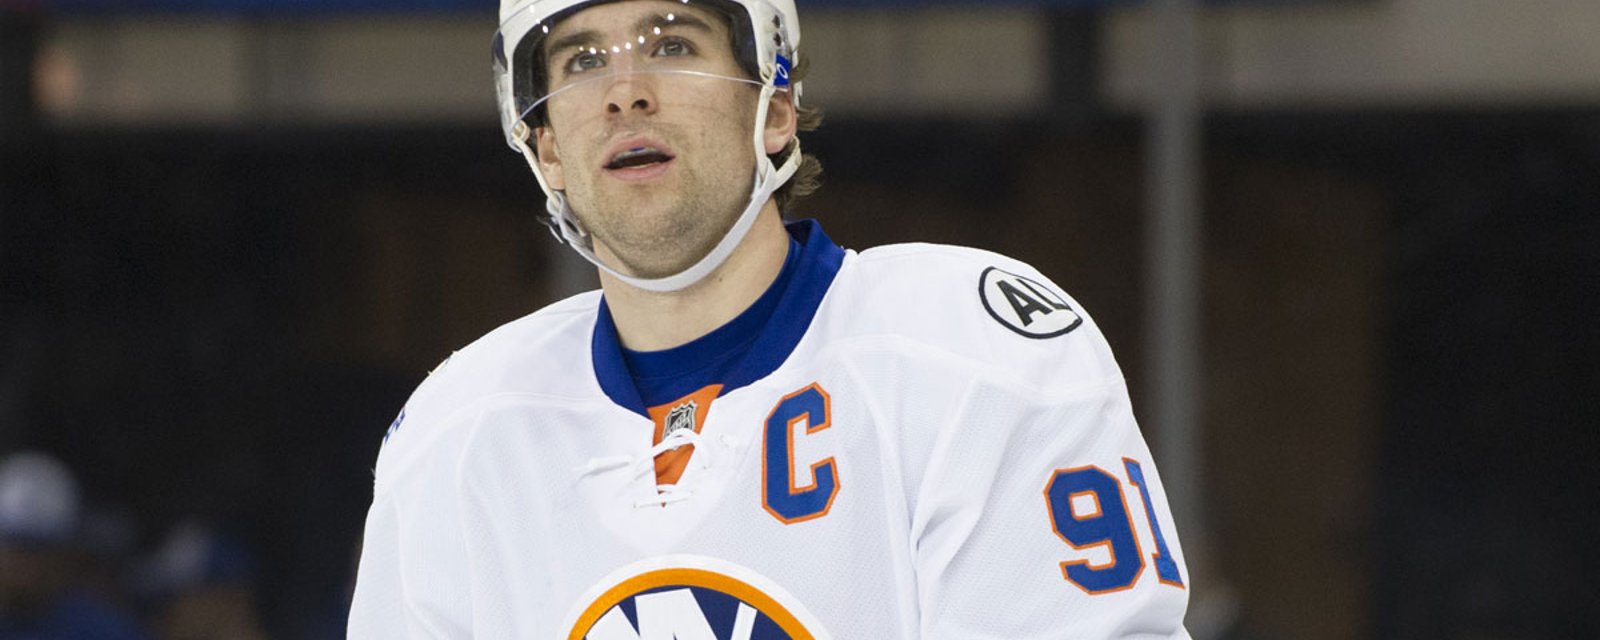 Tavares comments on bad ice that may have caused his season-ending injury